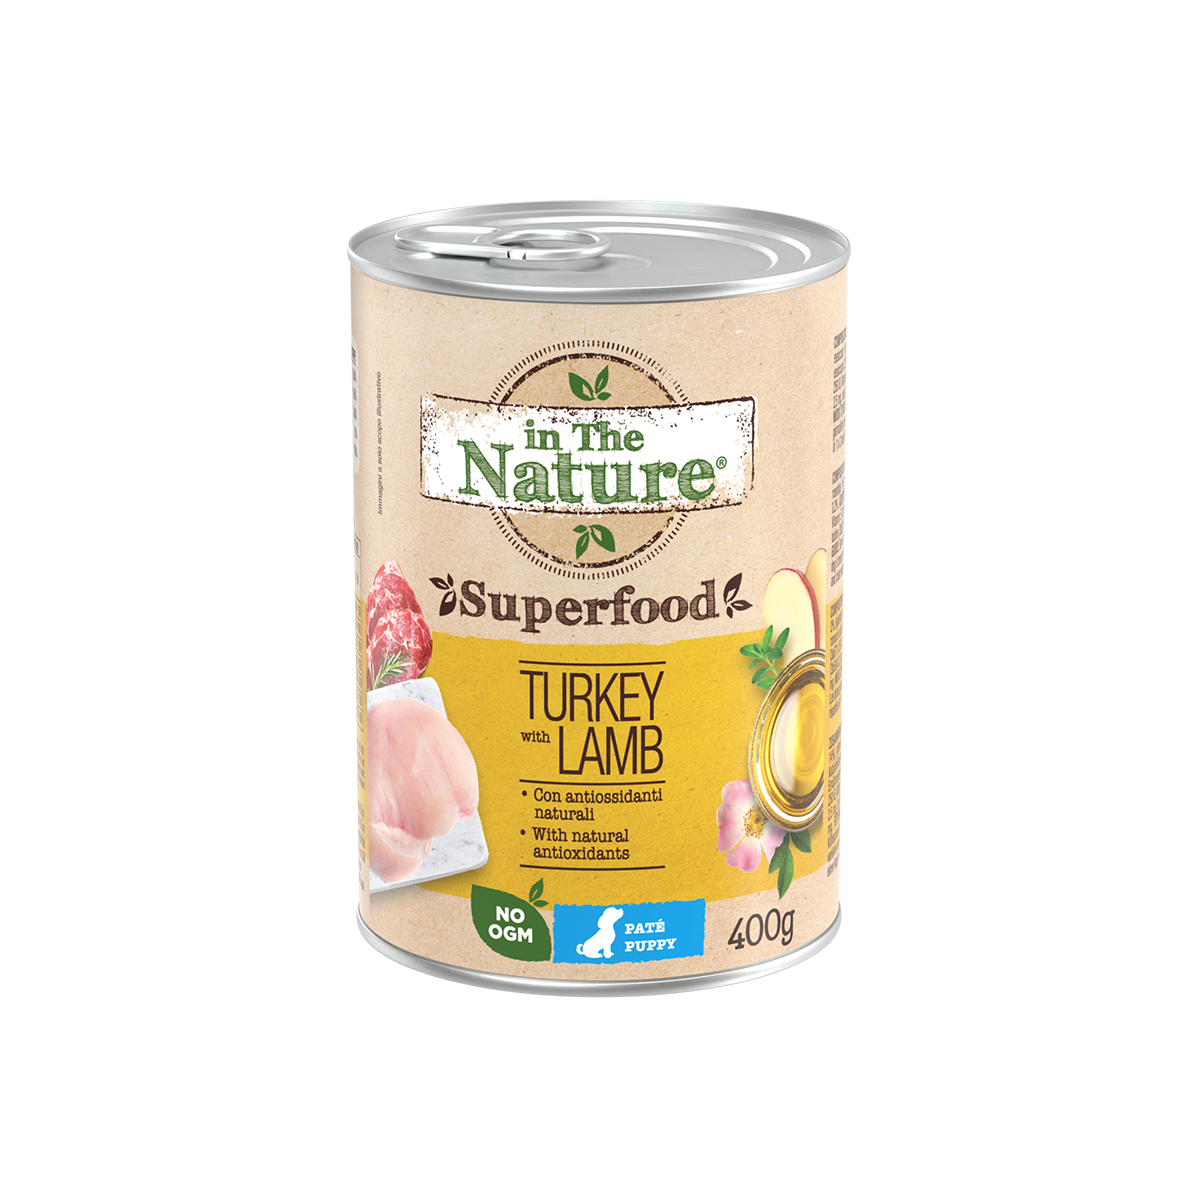 IN THE NATURE PATÉ SUPERFOOD PUPPY